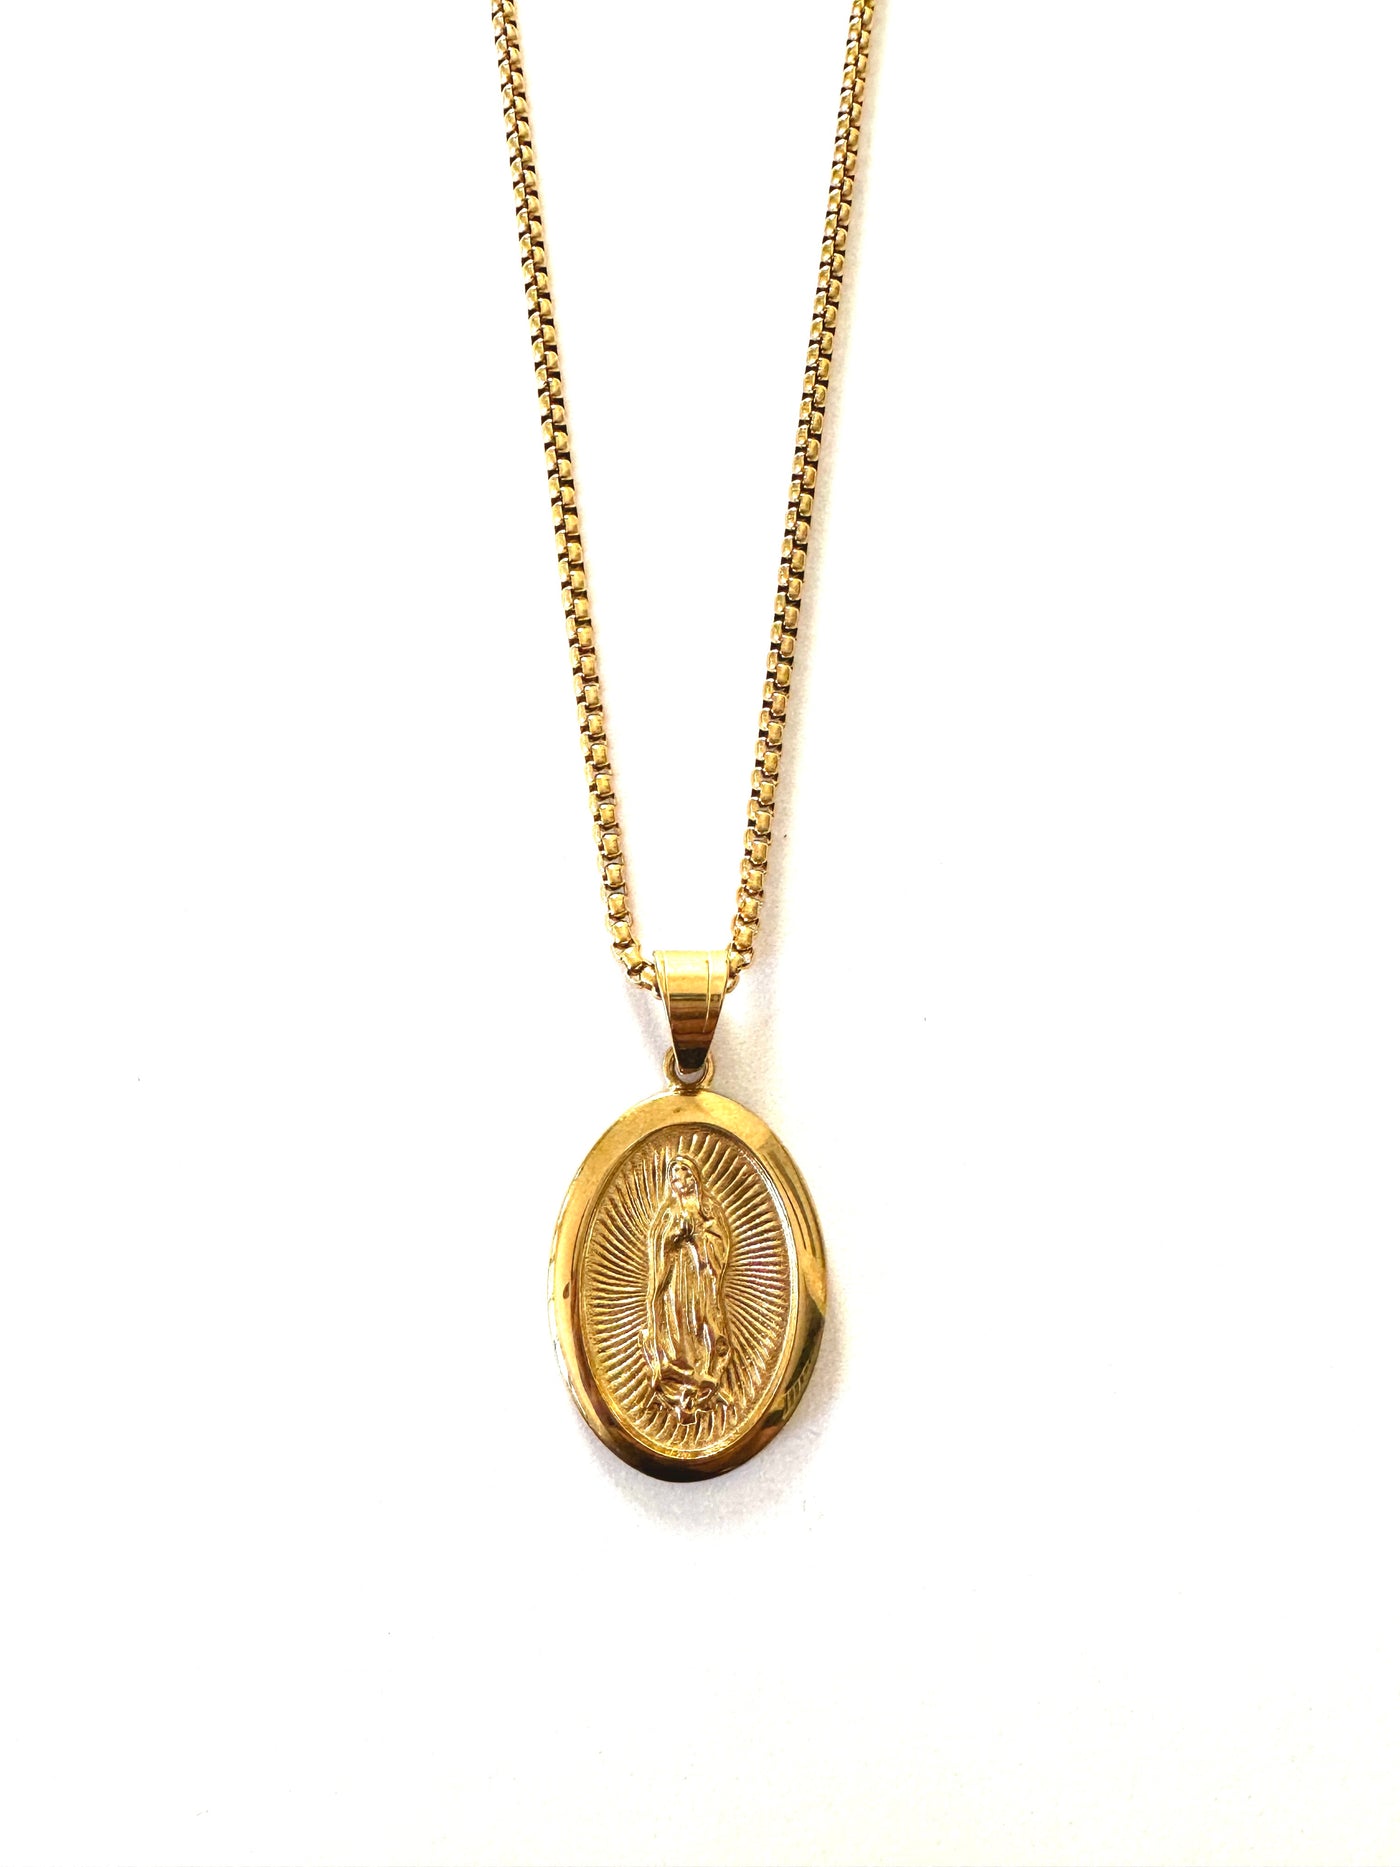 Our Protection Guadalupe Necklace